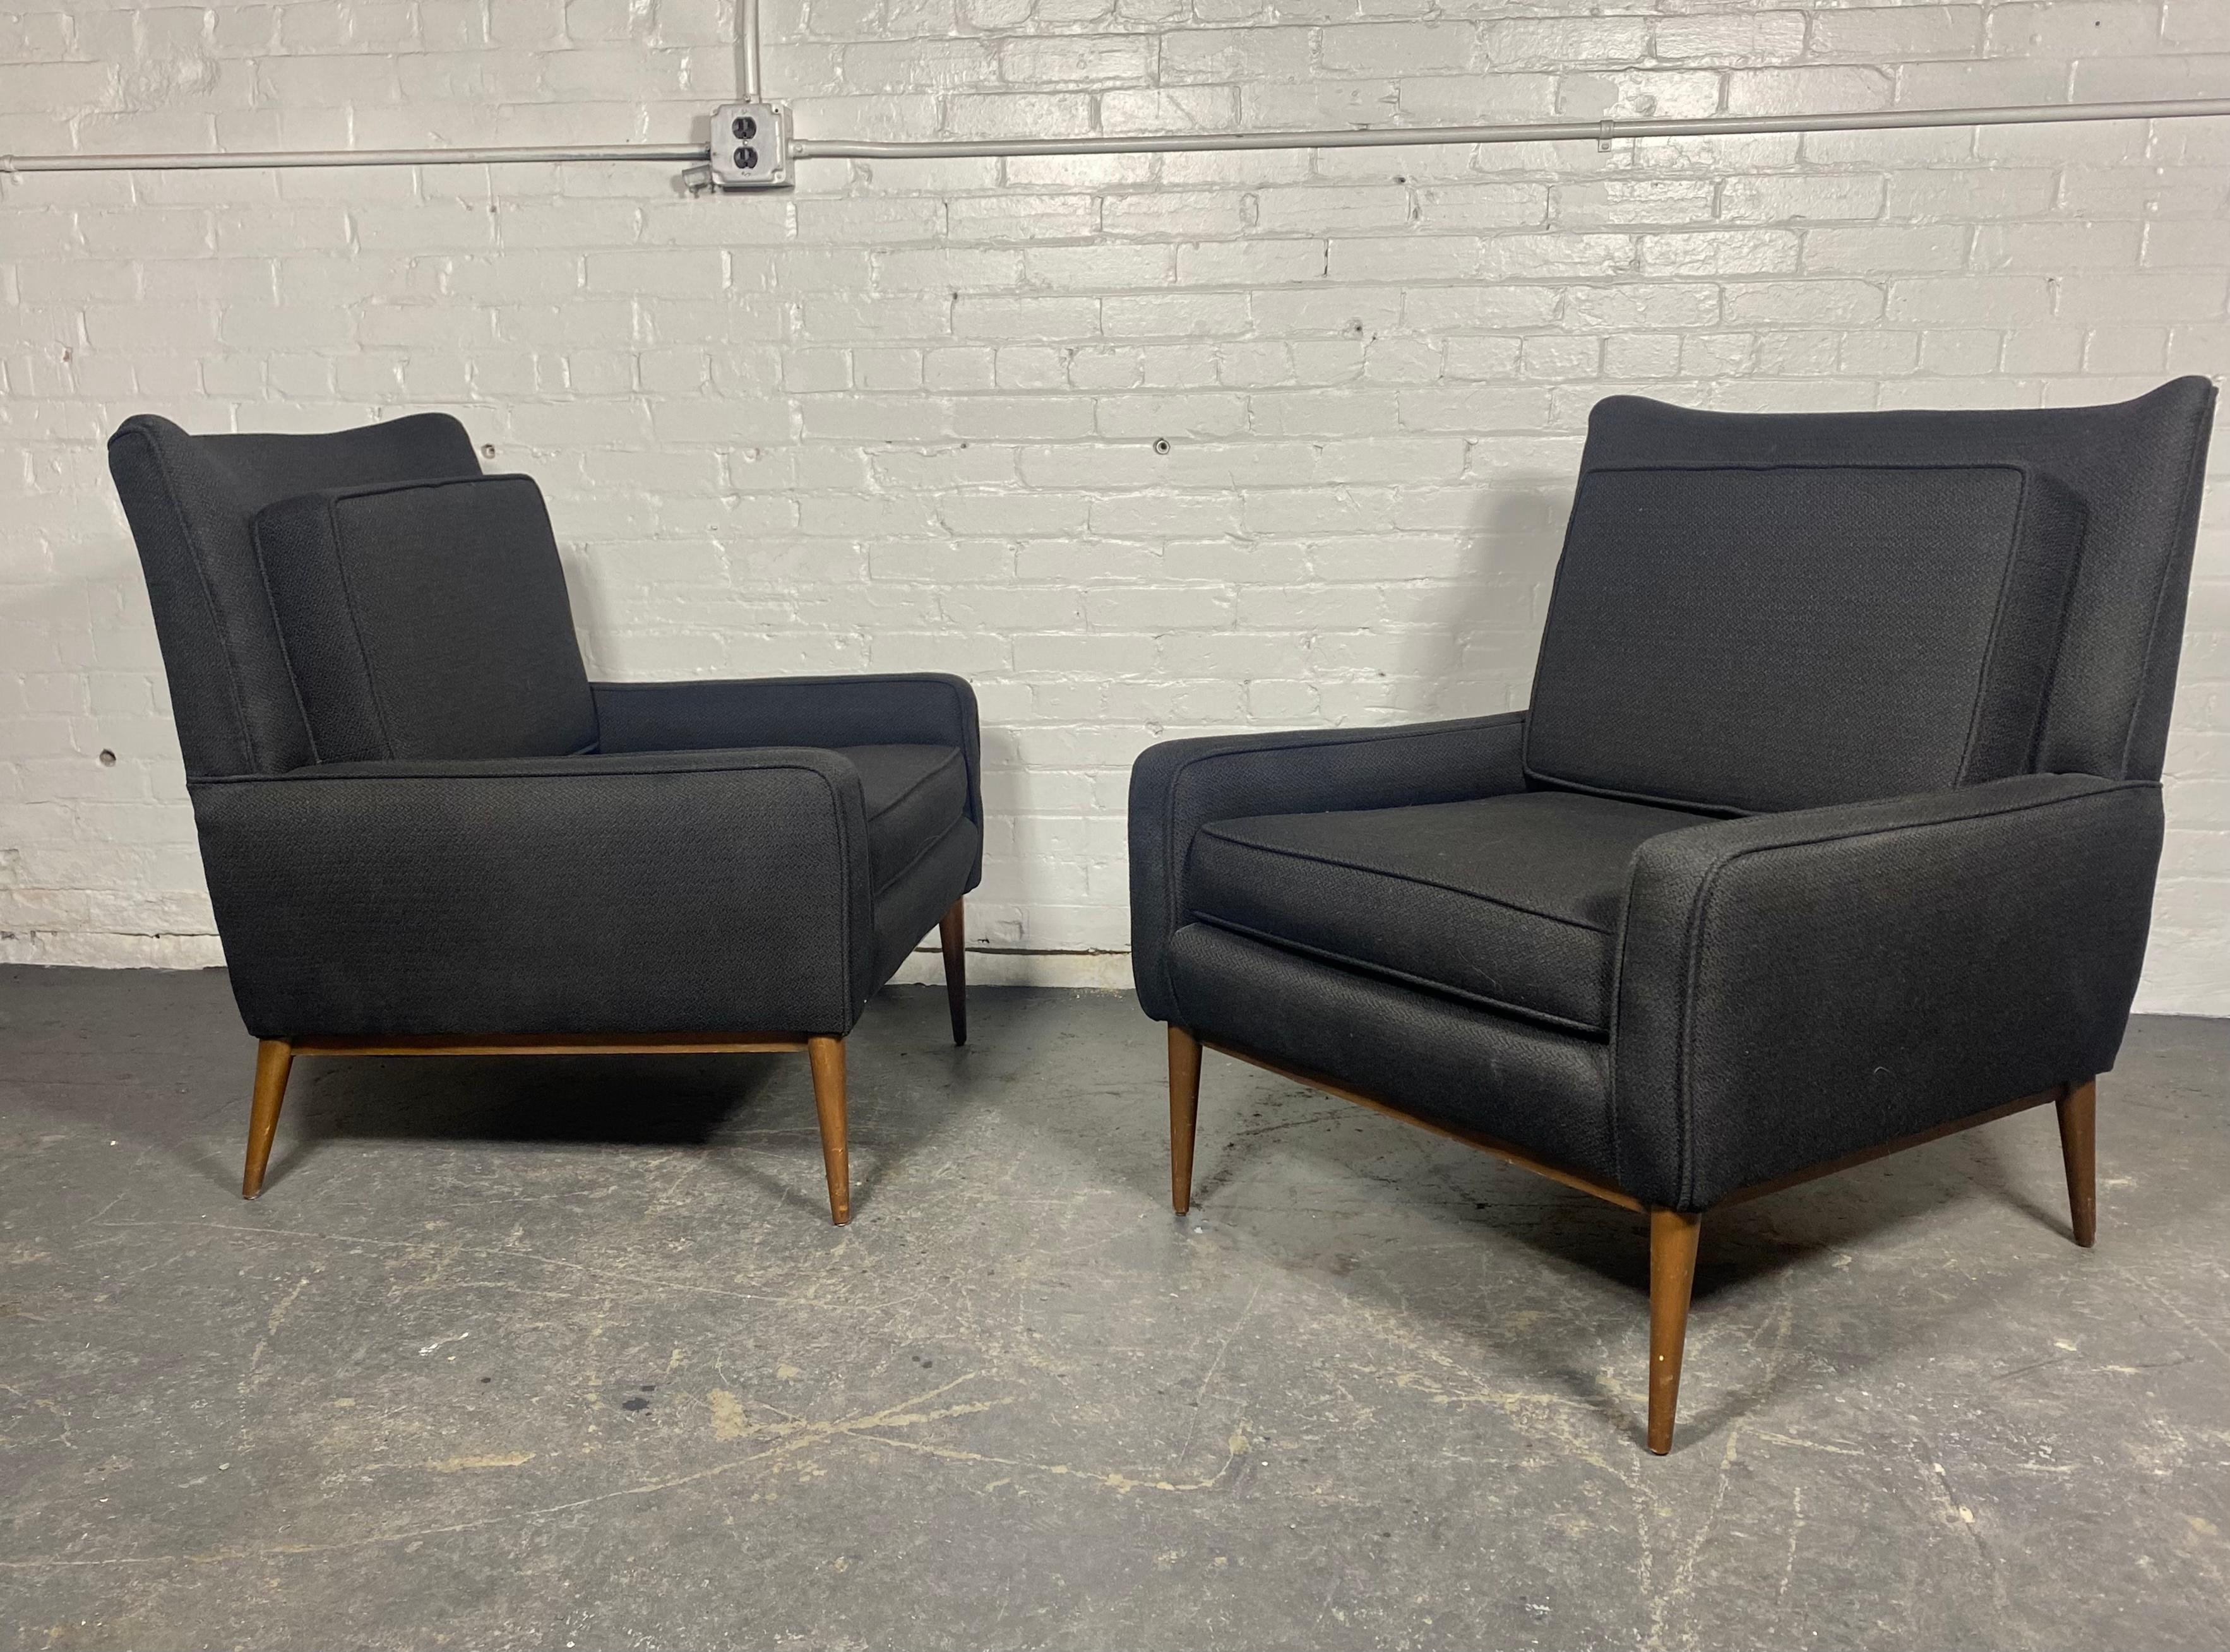 Mid-20th Century Classic Pair Modernist Lounge Chairs attributed to Paul McCobb / Directional For Sale